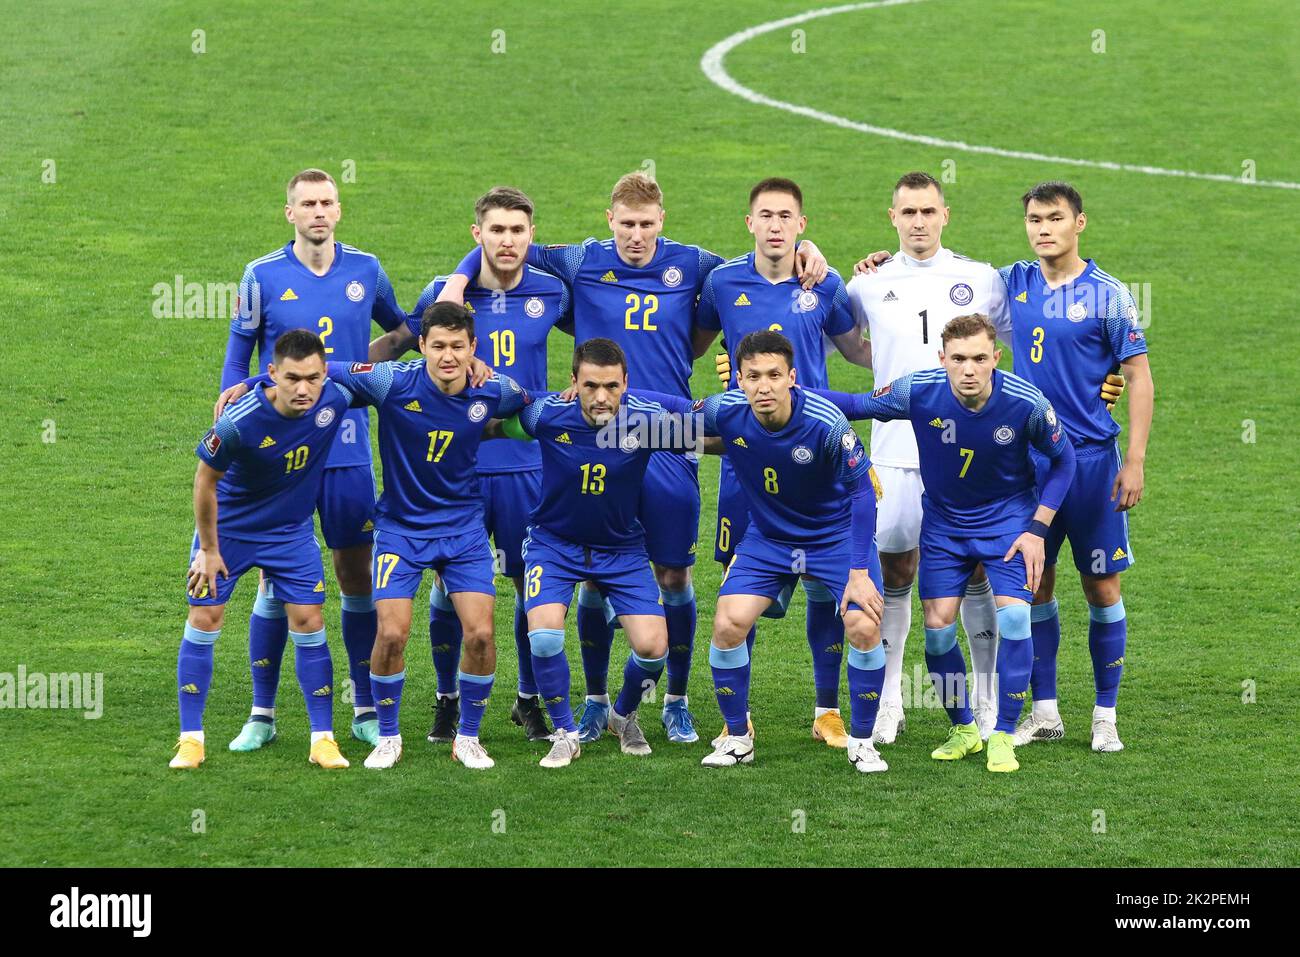 KYIV, UKRAINE - MARCH 31, 2021: Players of Kazakhstan National Team pose for a group photo before the FIFA World Cup 2022 Qualifying round game Ukraine v Kazakhstan at NSC Olimpiyskiy stadium in Kyiv Stock Photo